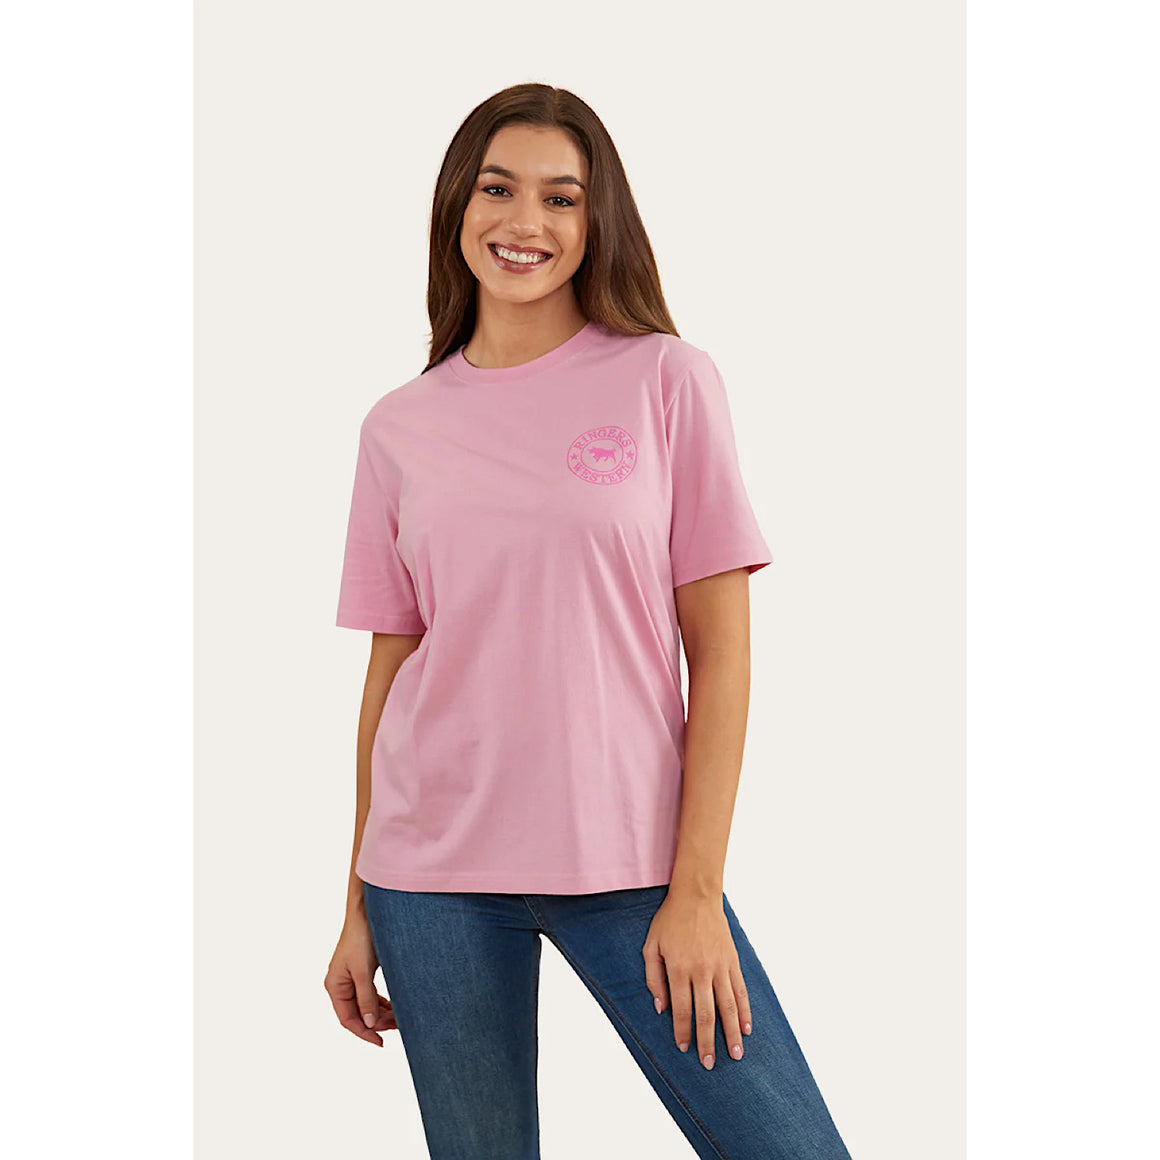 Ringers Western Signature Bull Women's Loose Fit T-Shirt - Pastel Pink/Candy